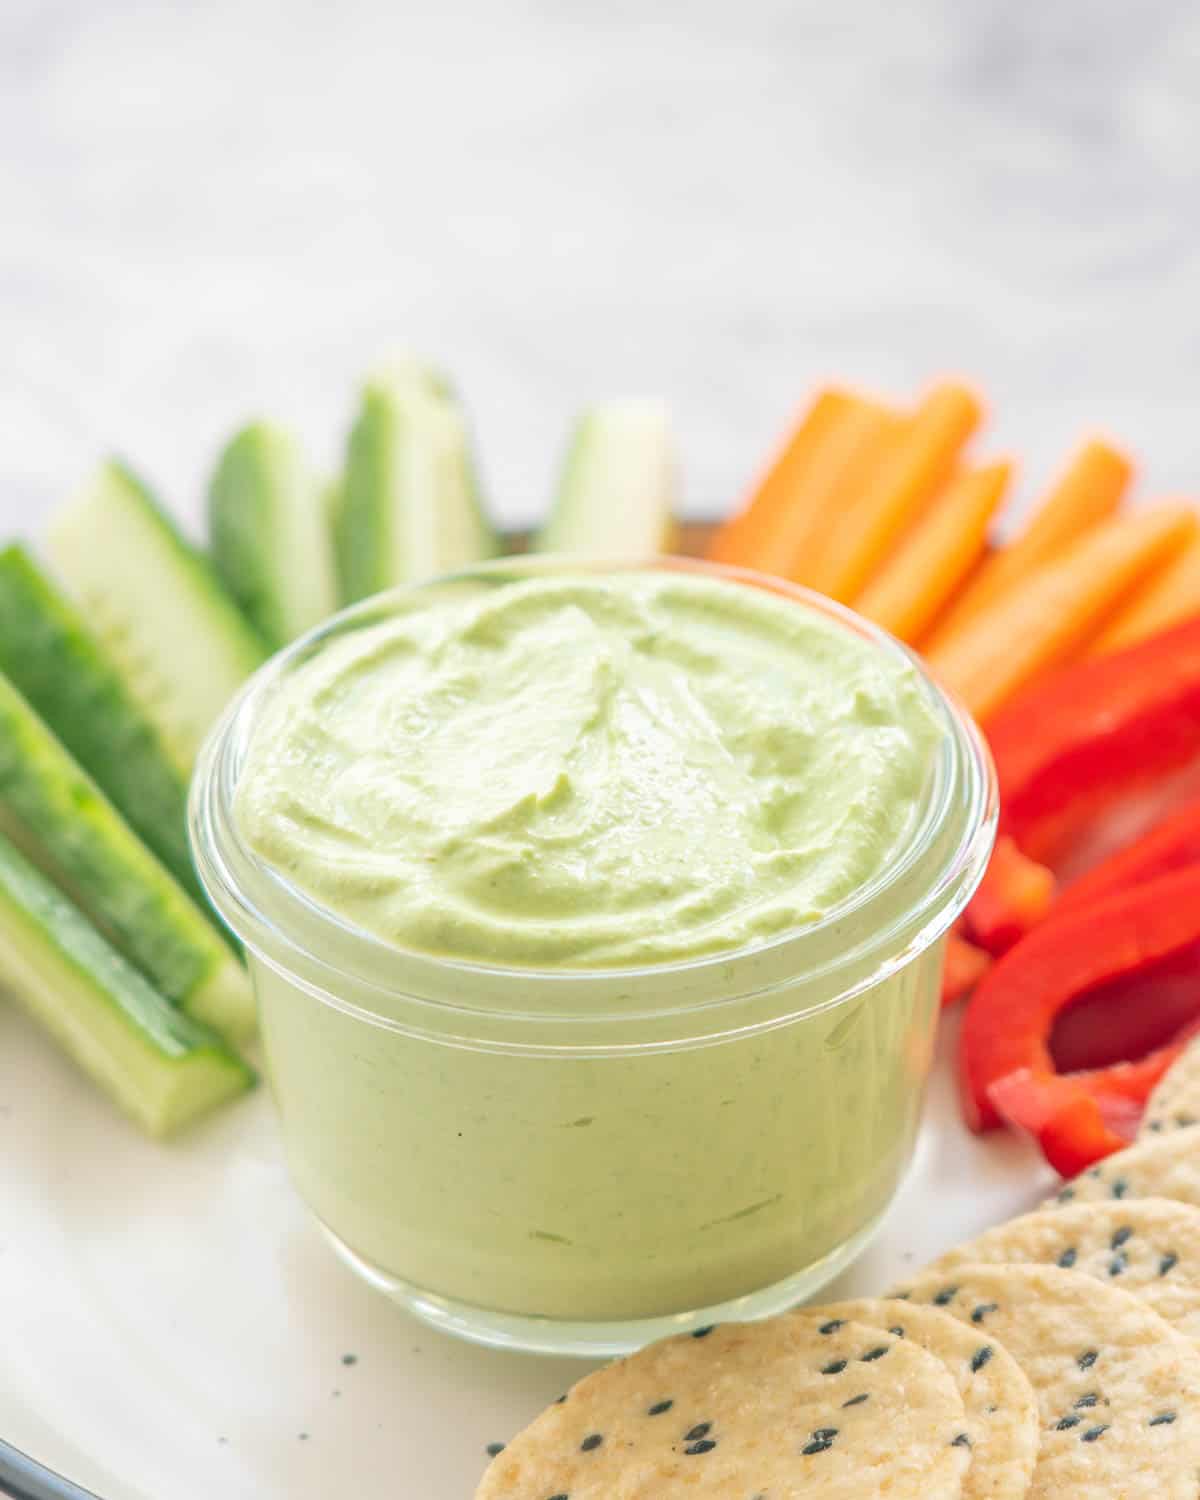 front view of cucumber, carrot and capsicum slices and crackers on a plate with a glass ramekin of cottage cheese dip 